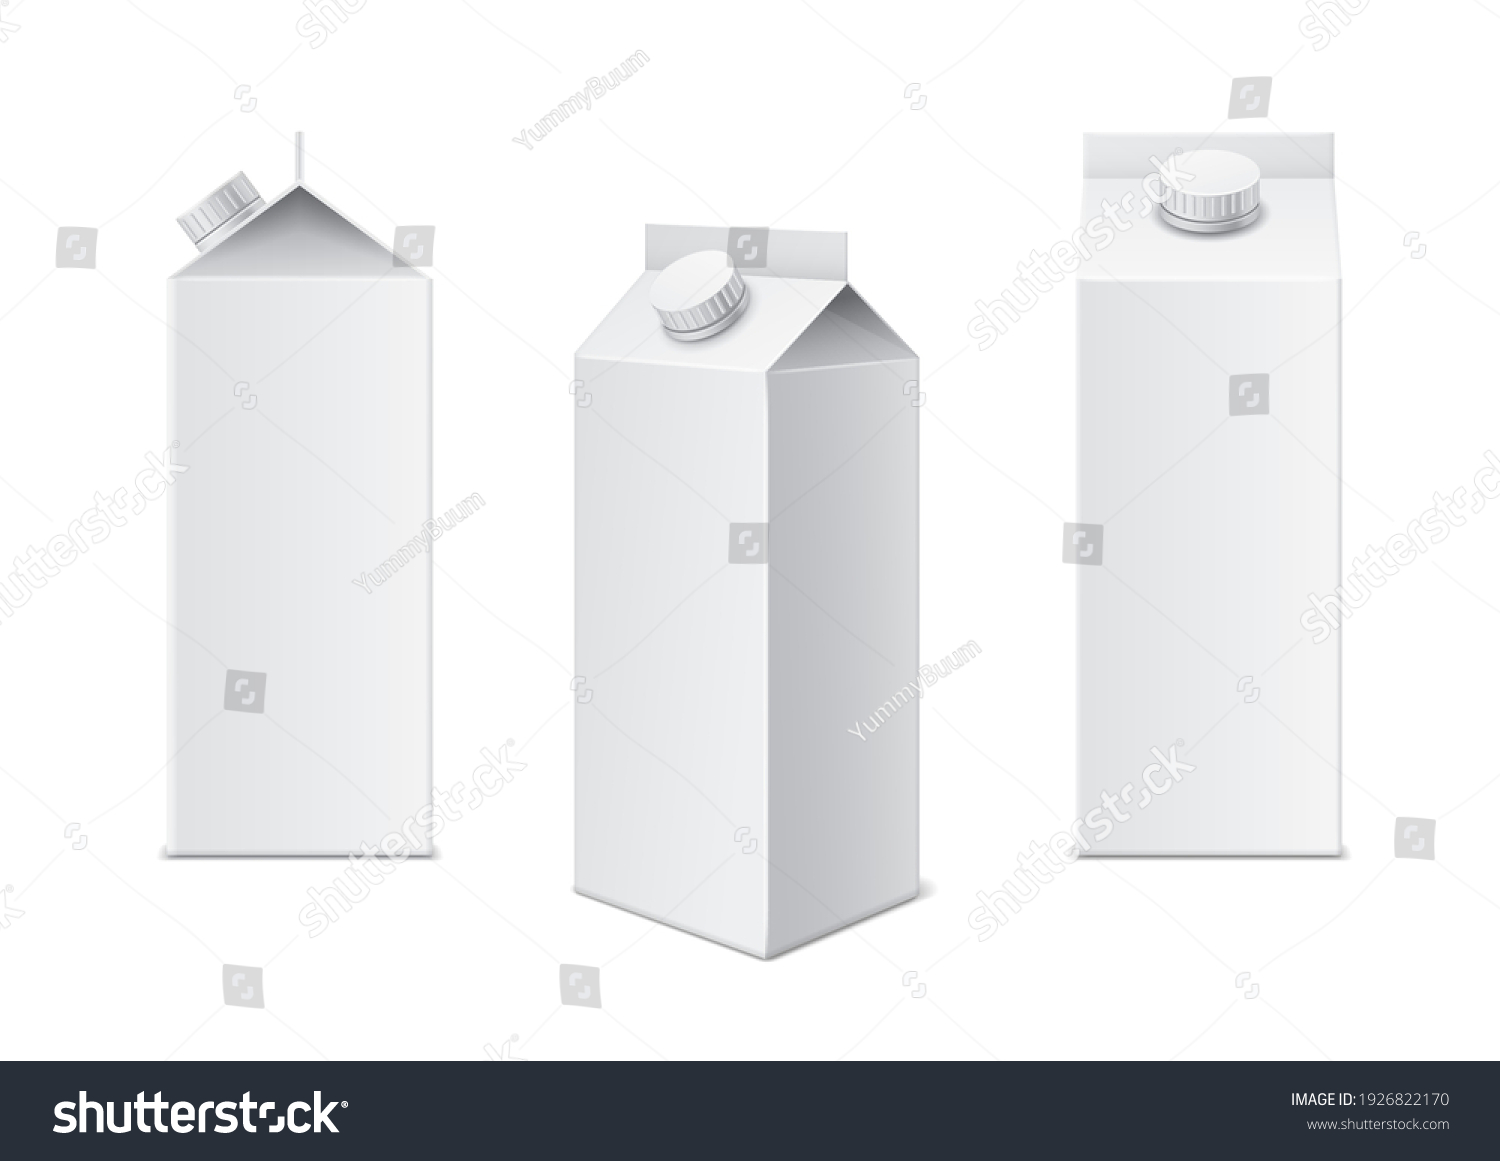 SVG of Realistic milk box. 3d white cardboard template for juice, milk and beverage package, different viewing angles drinks blank mockups. Closed rectangular container brand presentation vector isolated set svg